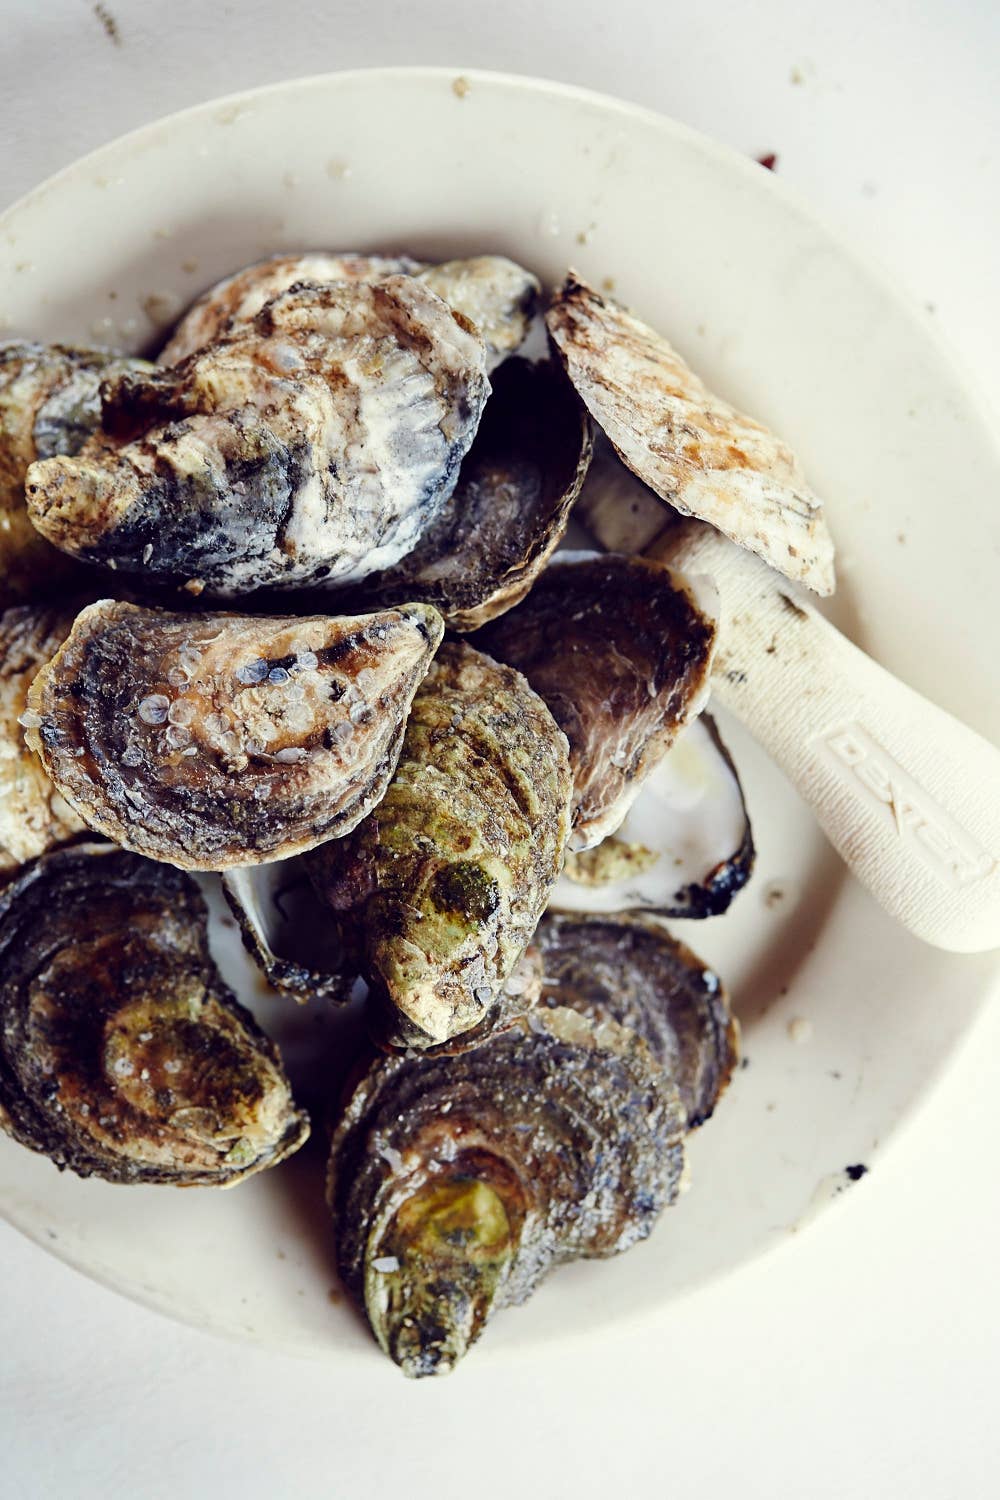 VIDEO: Maine’s Pemaquid Oyster Company